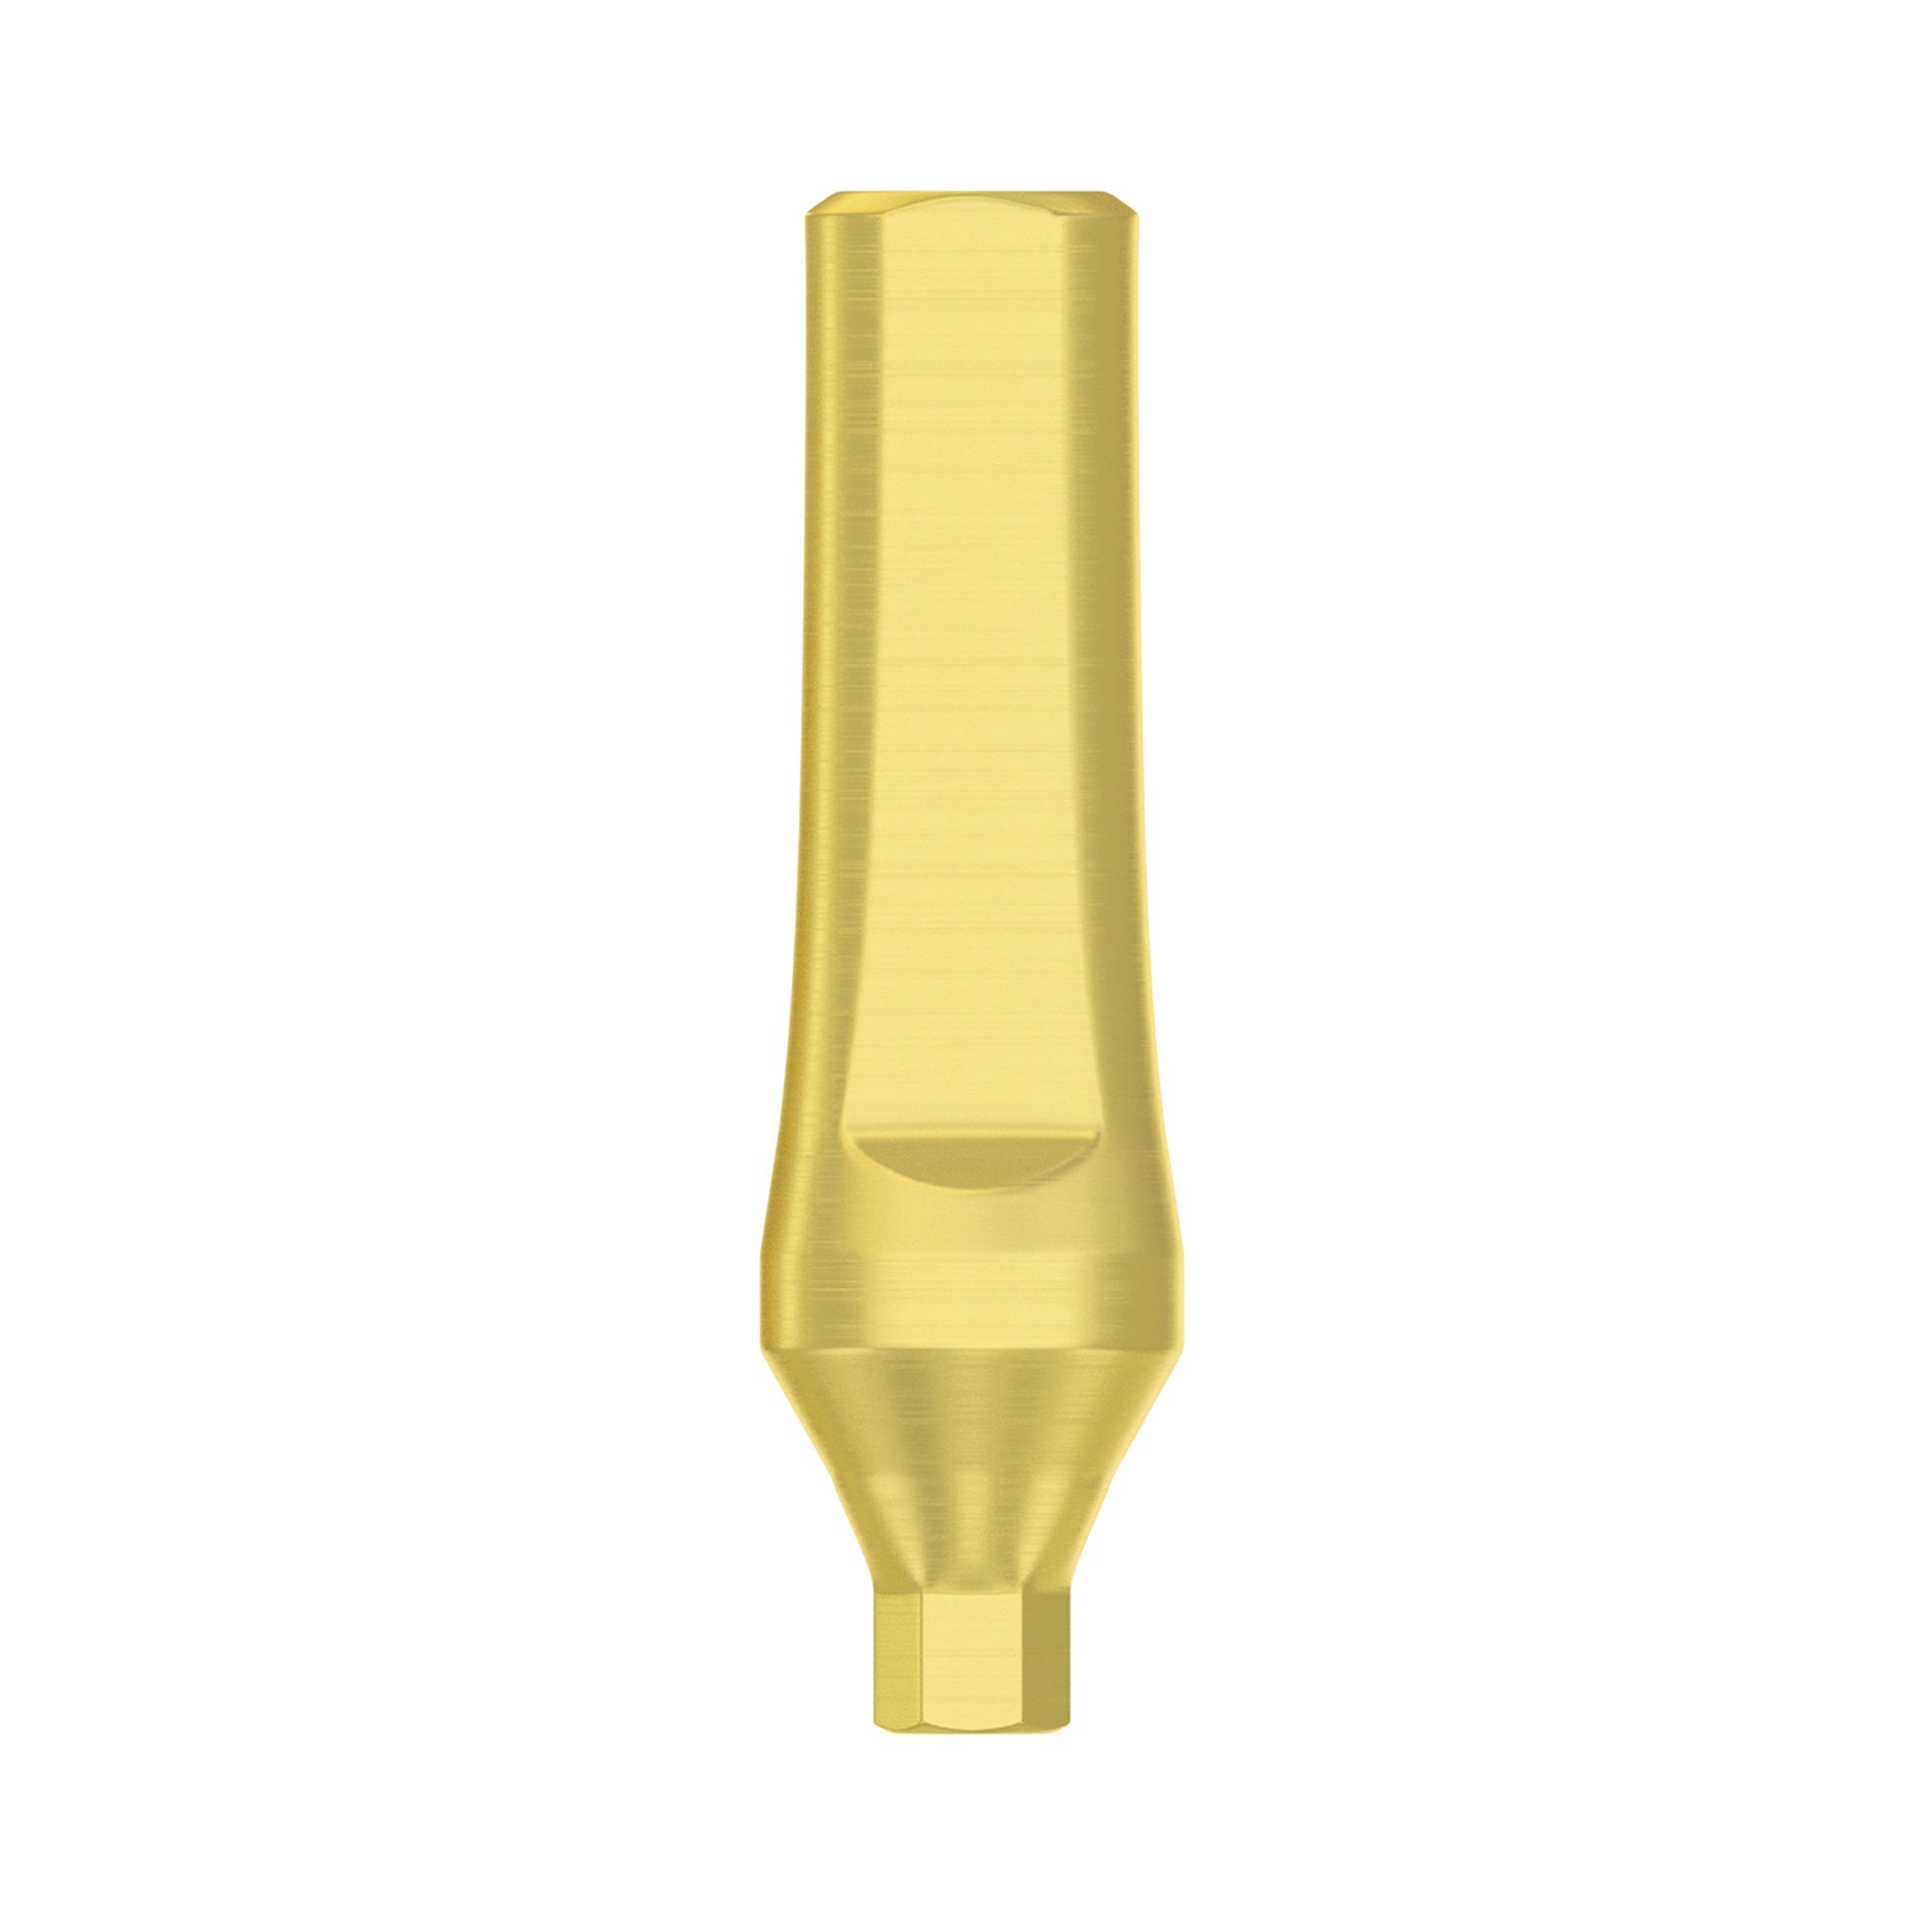 DSI Standart Straight Abutment - Conical Connection NP Ø3.5mm